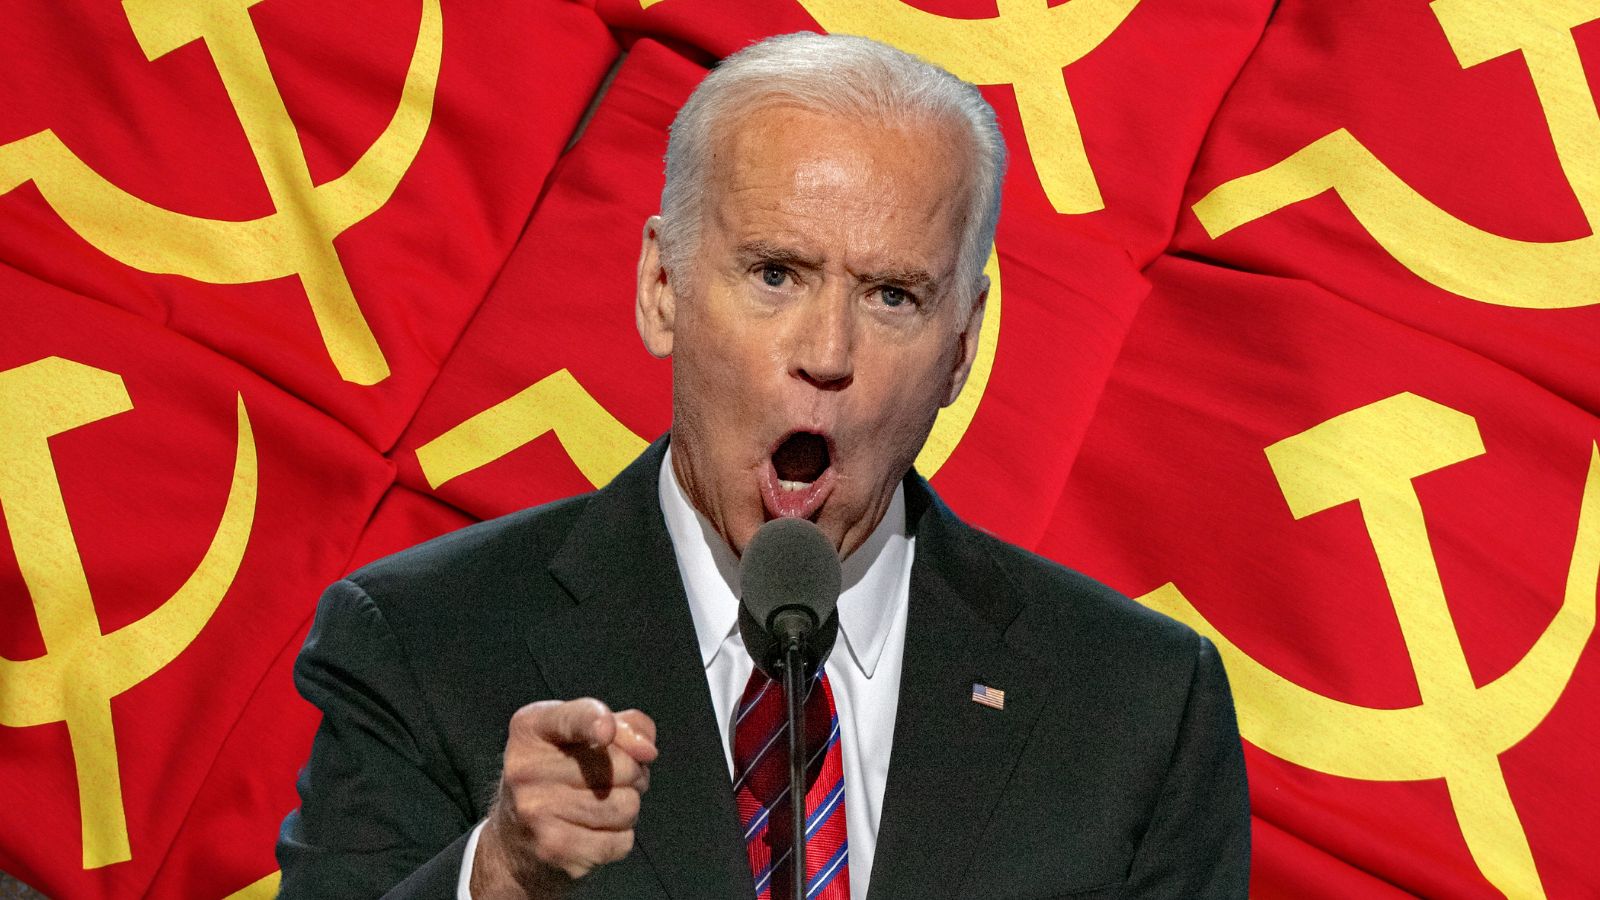 “Did That Fundraising Come From the Chinese?”: Skepticism Intensifies as Biden Raises Millions